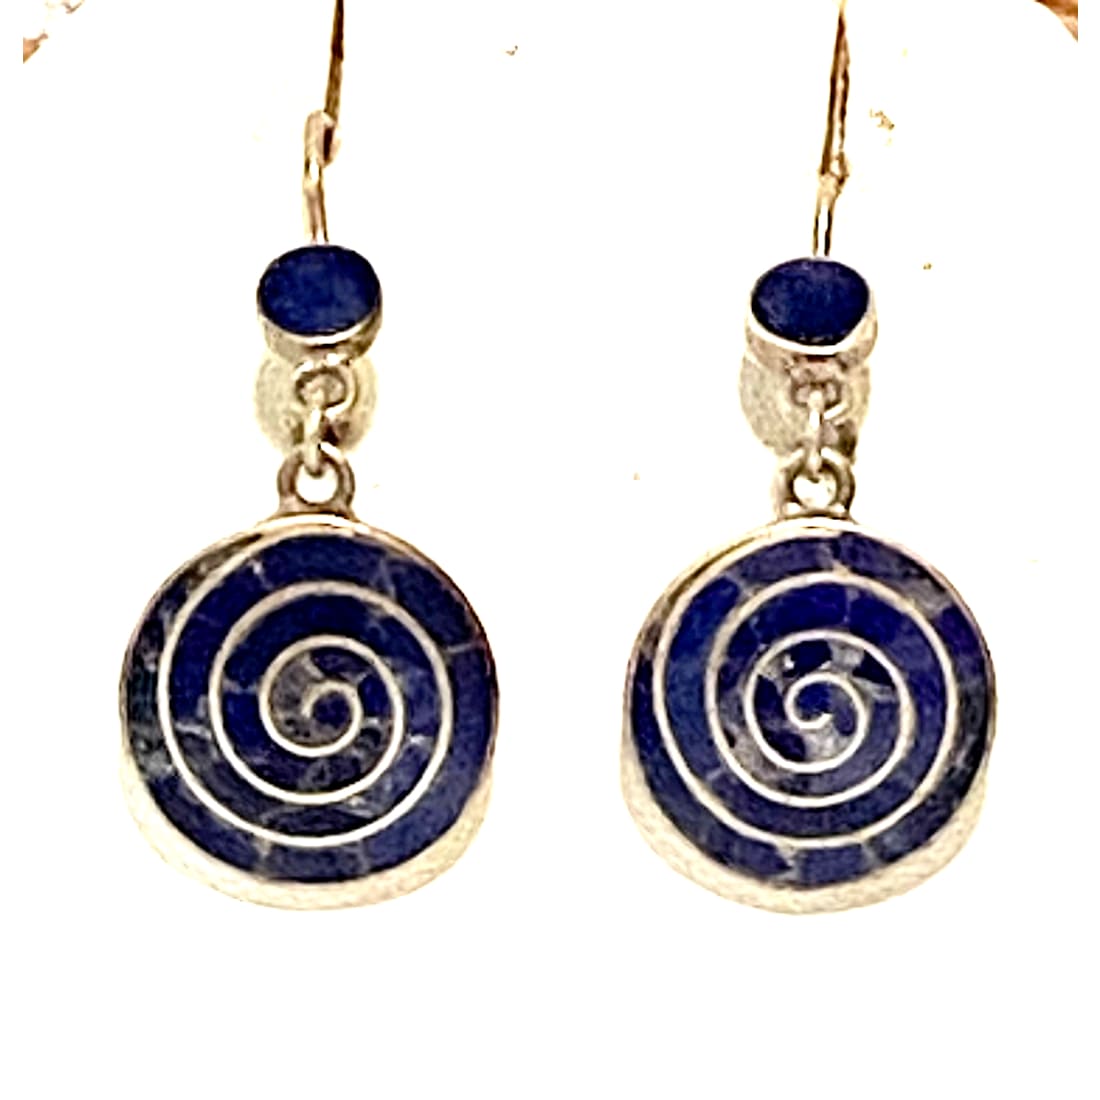 TAXCO Mexico Lapis Inlay Dangle Earrings Sterling Silver